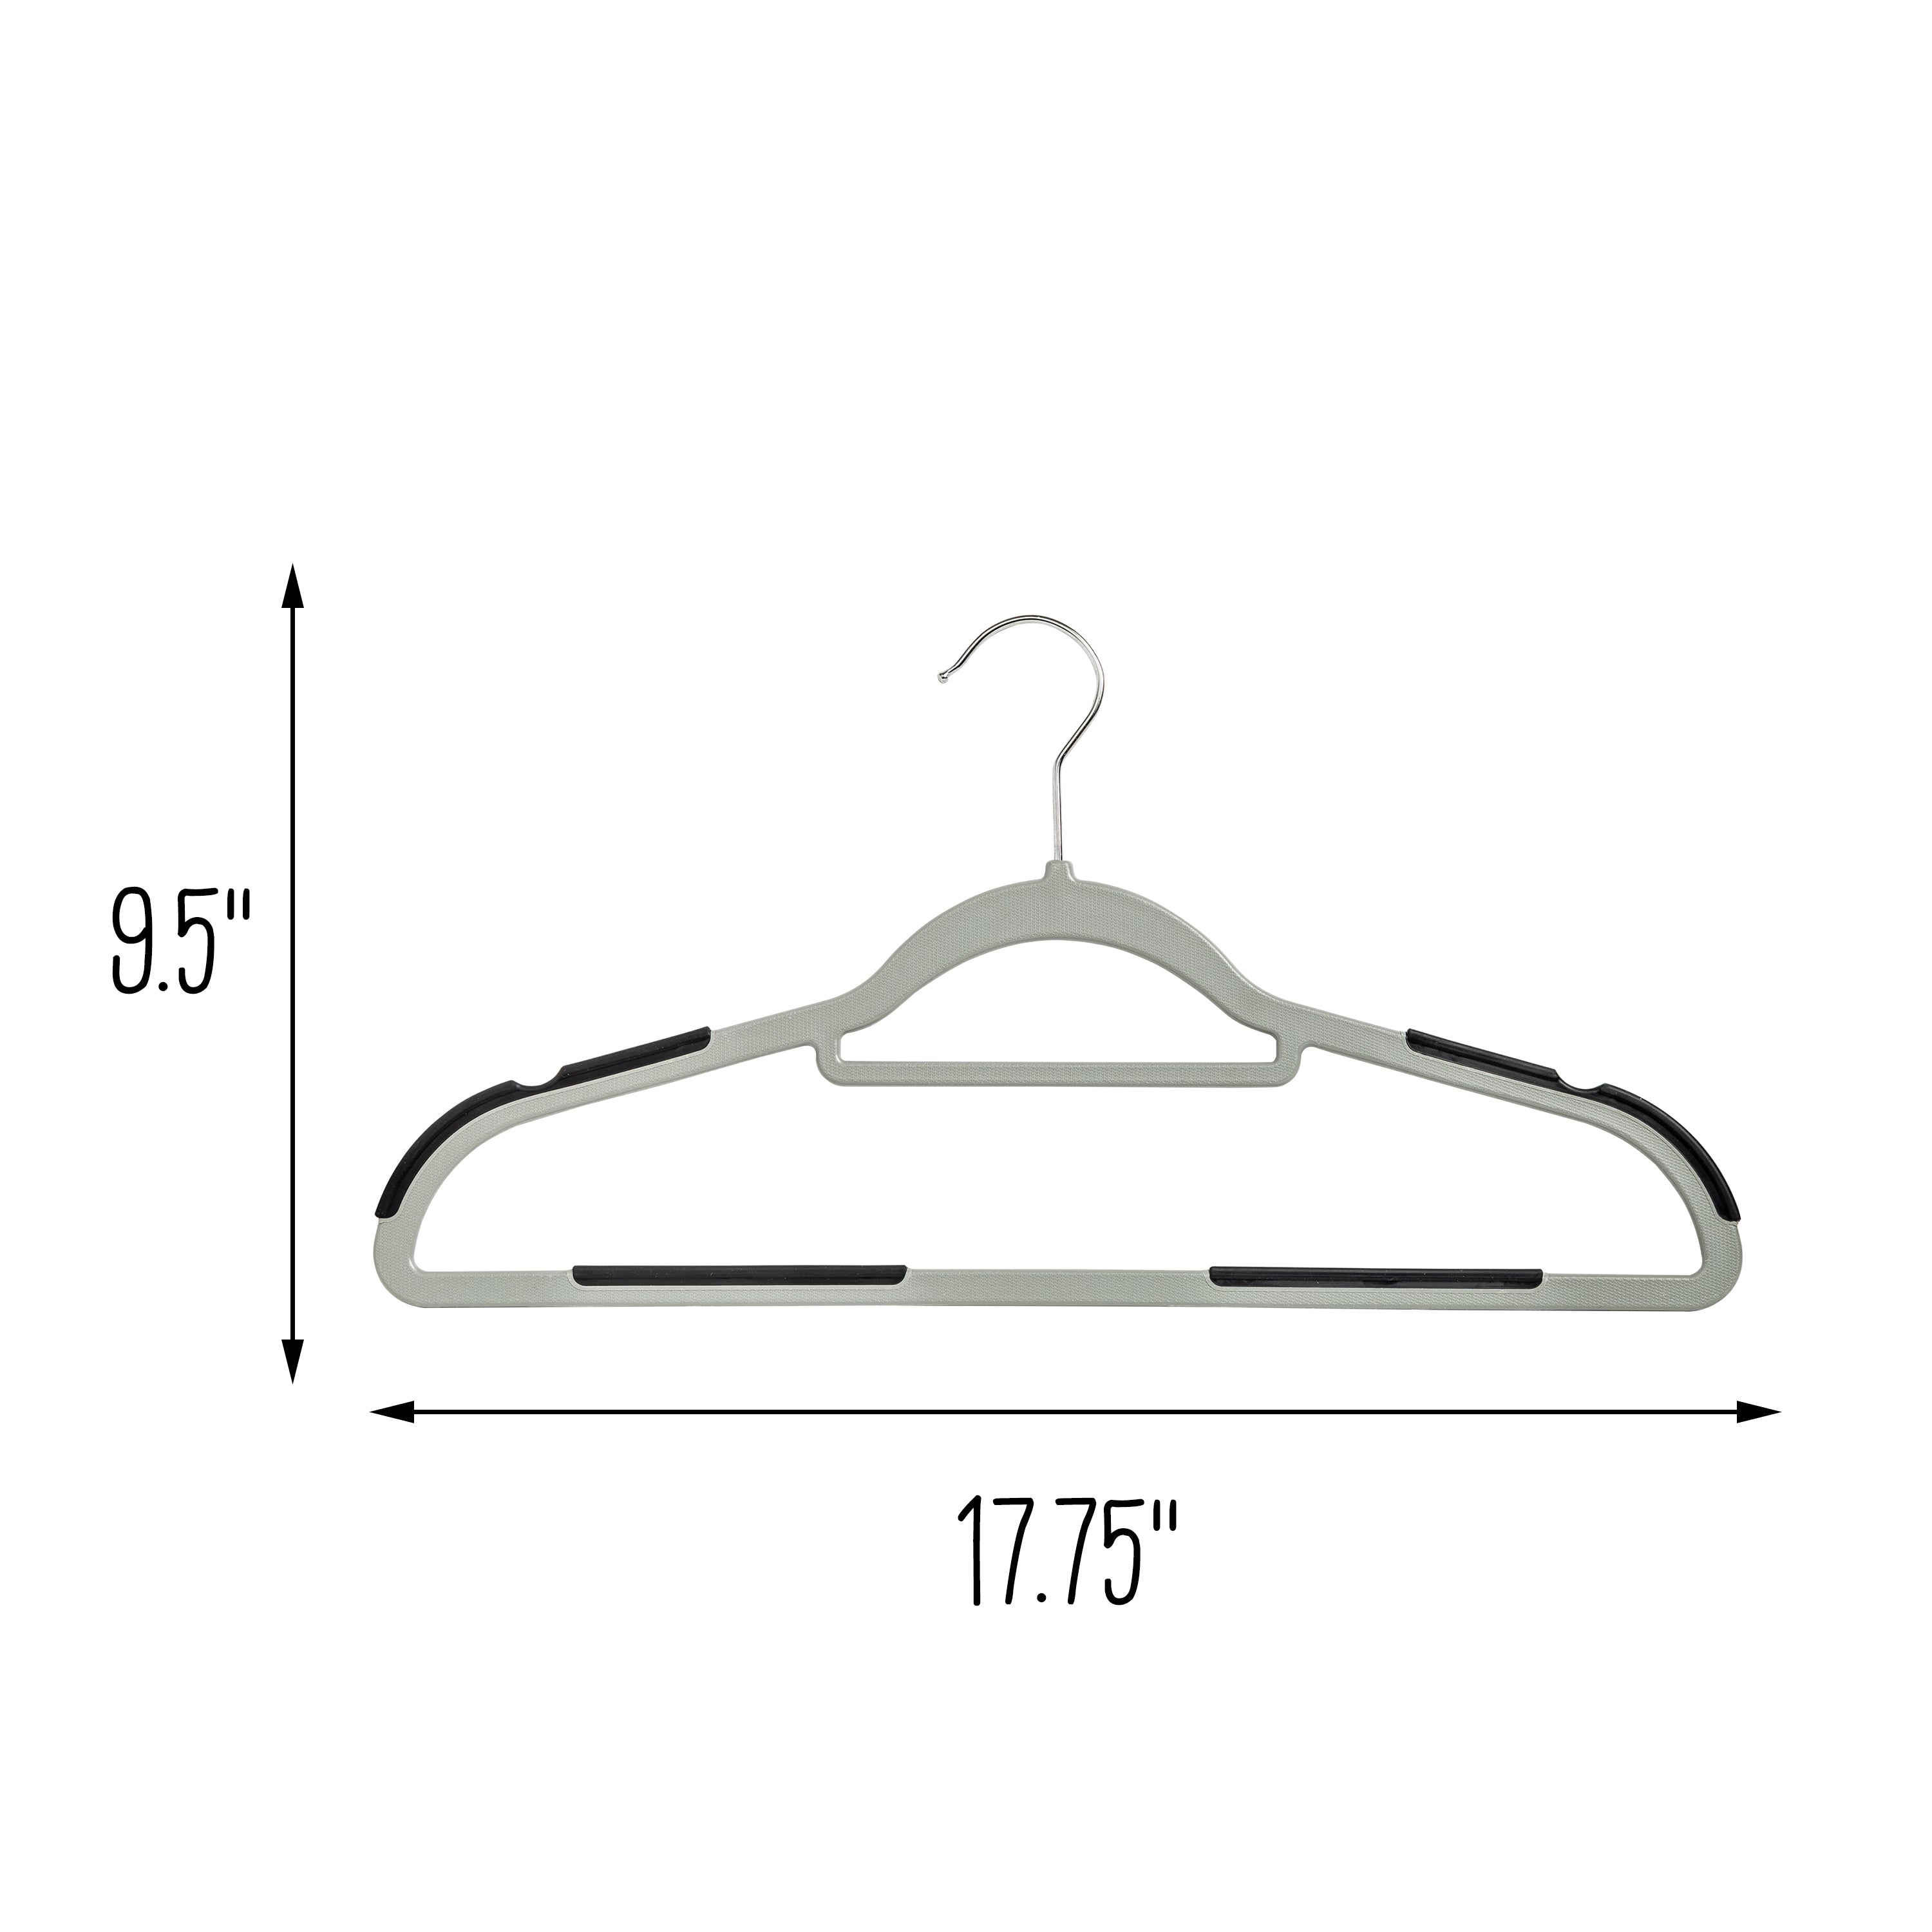 Space Saving Collection Plastic Non-Slip Hangers with Clips for Suit/Coat California Closets Black 50